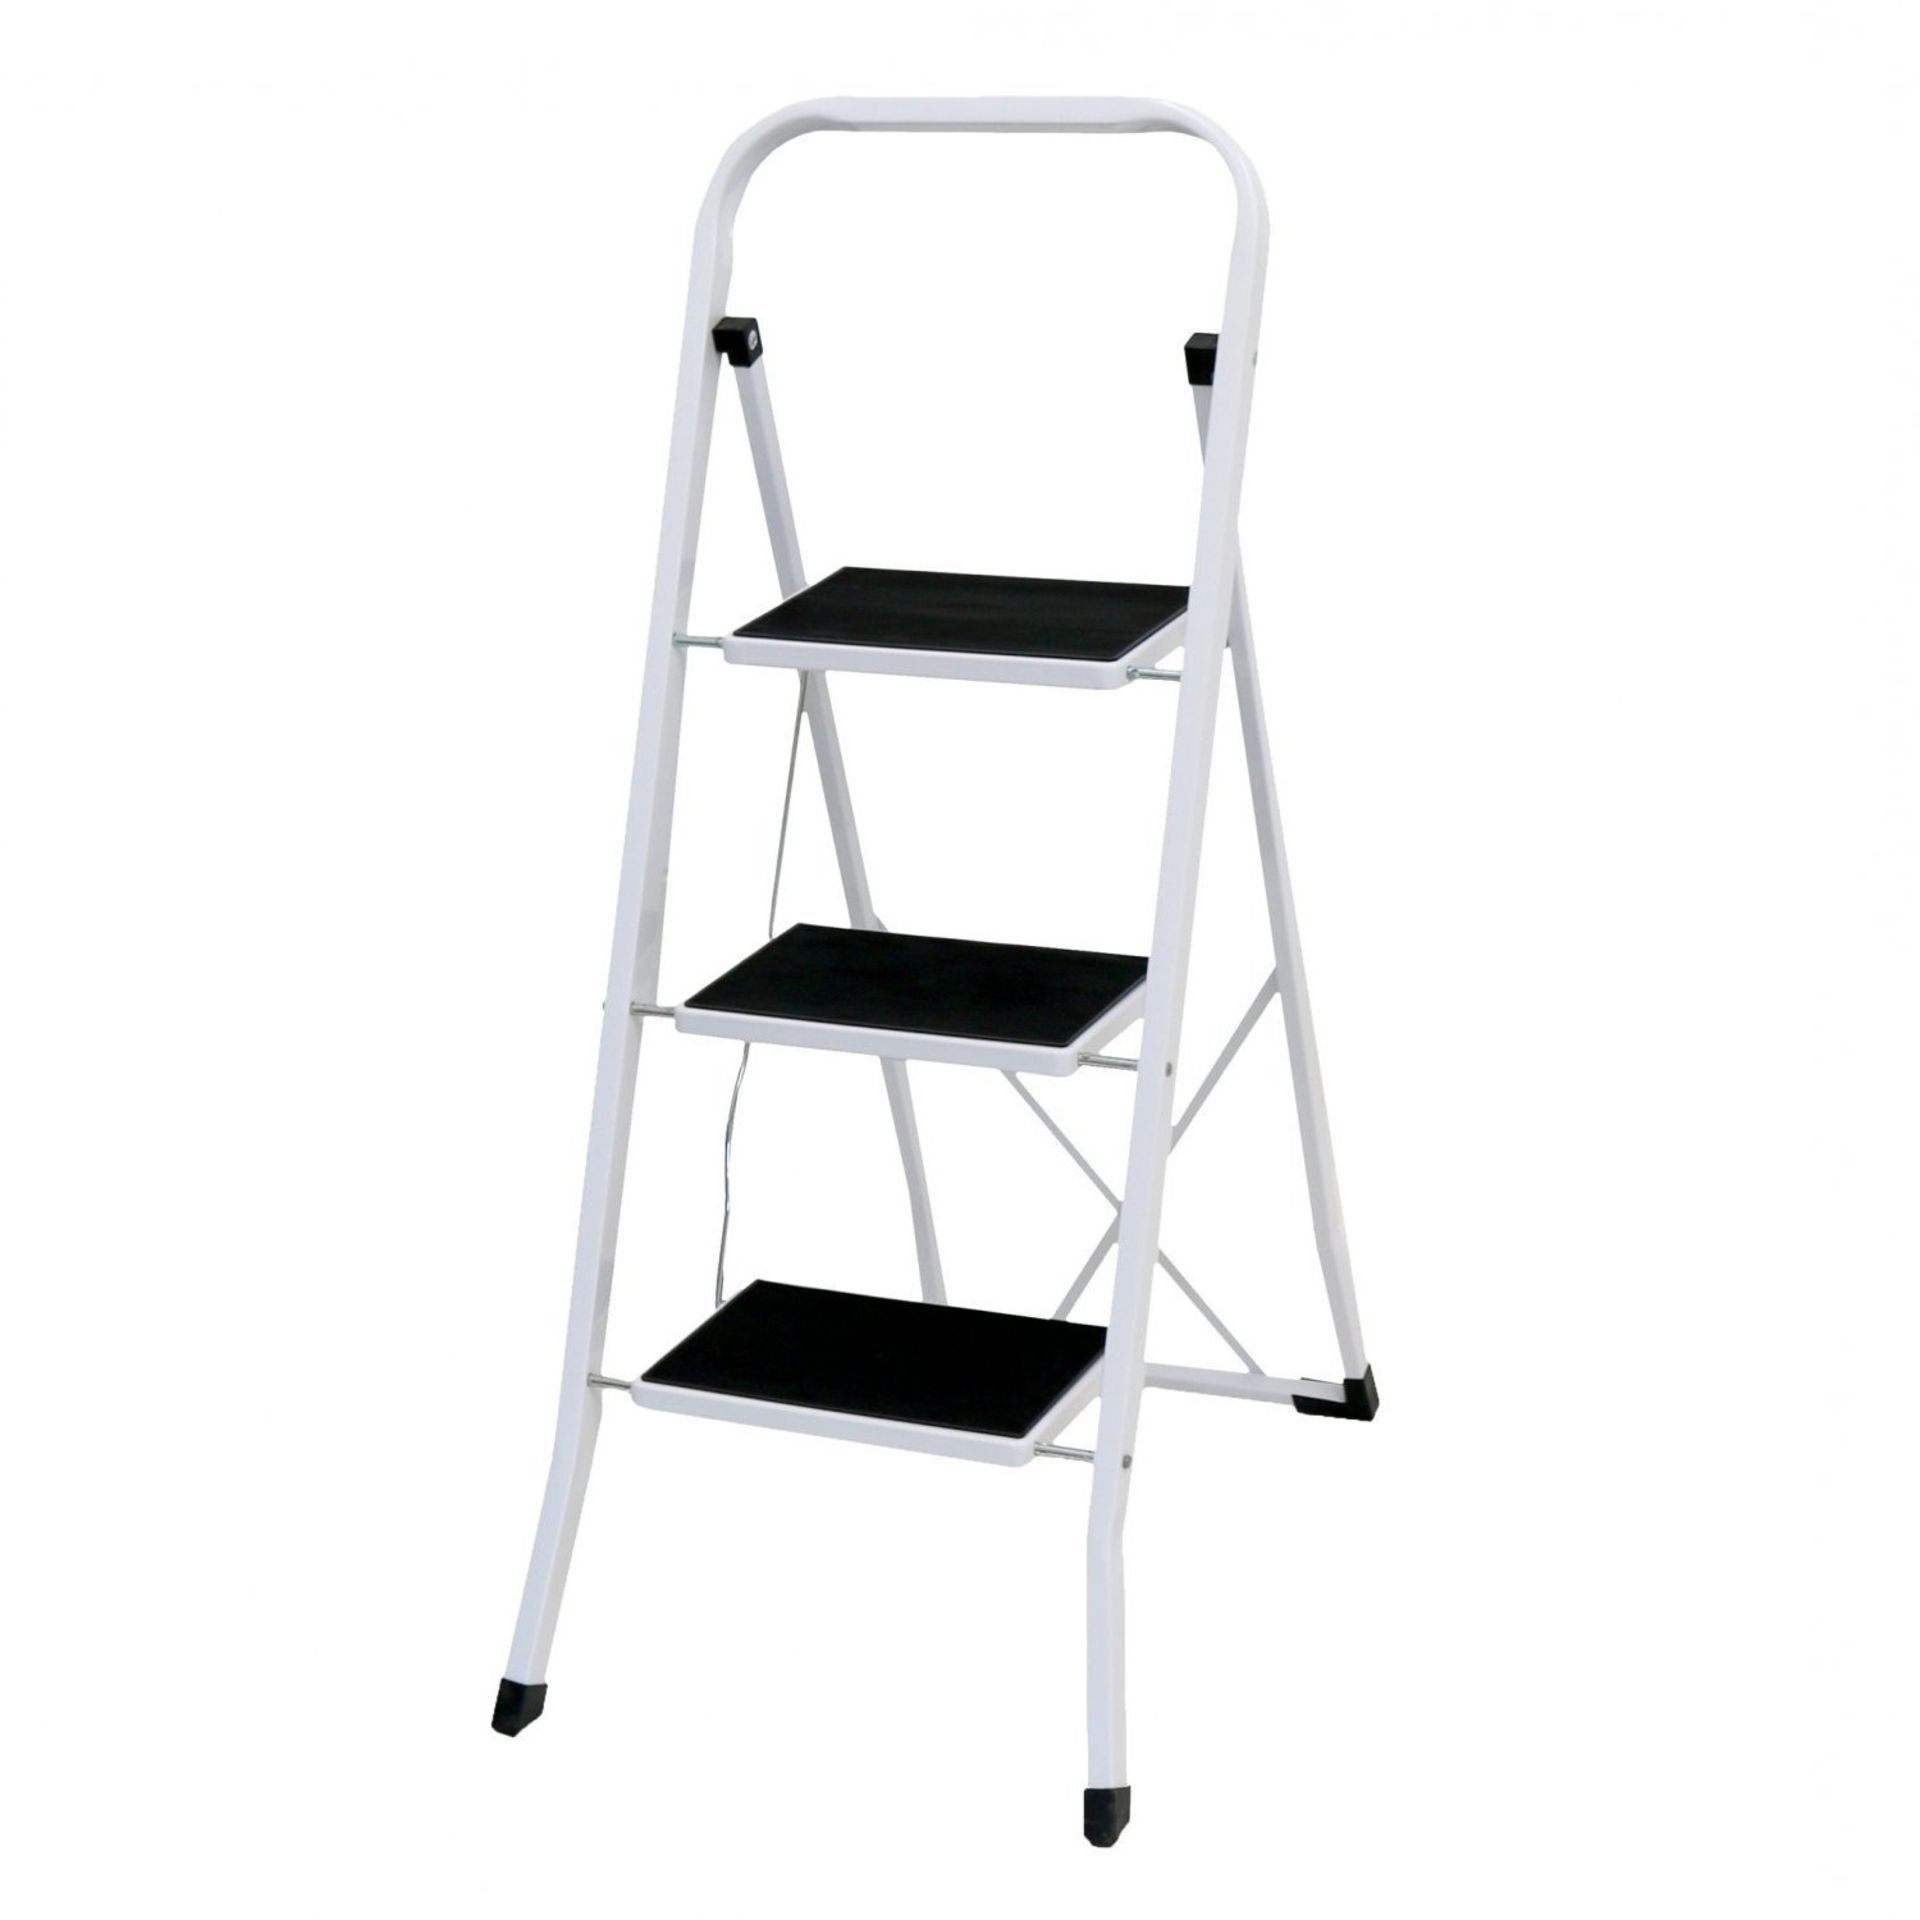 (D4) Foldable 3 Step Ladder Stepladder Non Slip Tread Safety Steel Wide steps with rubber mats...